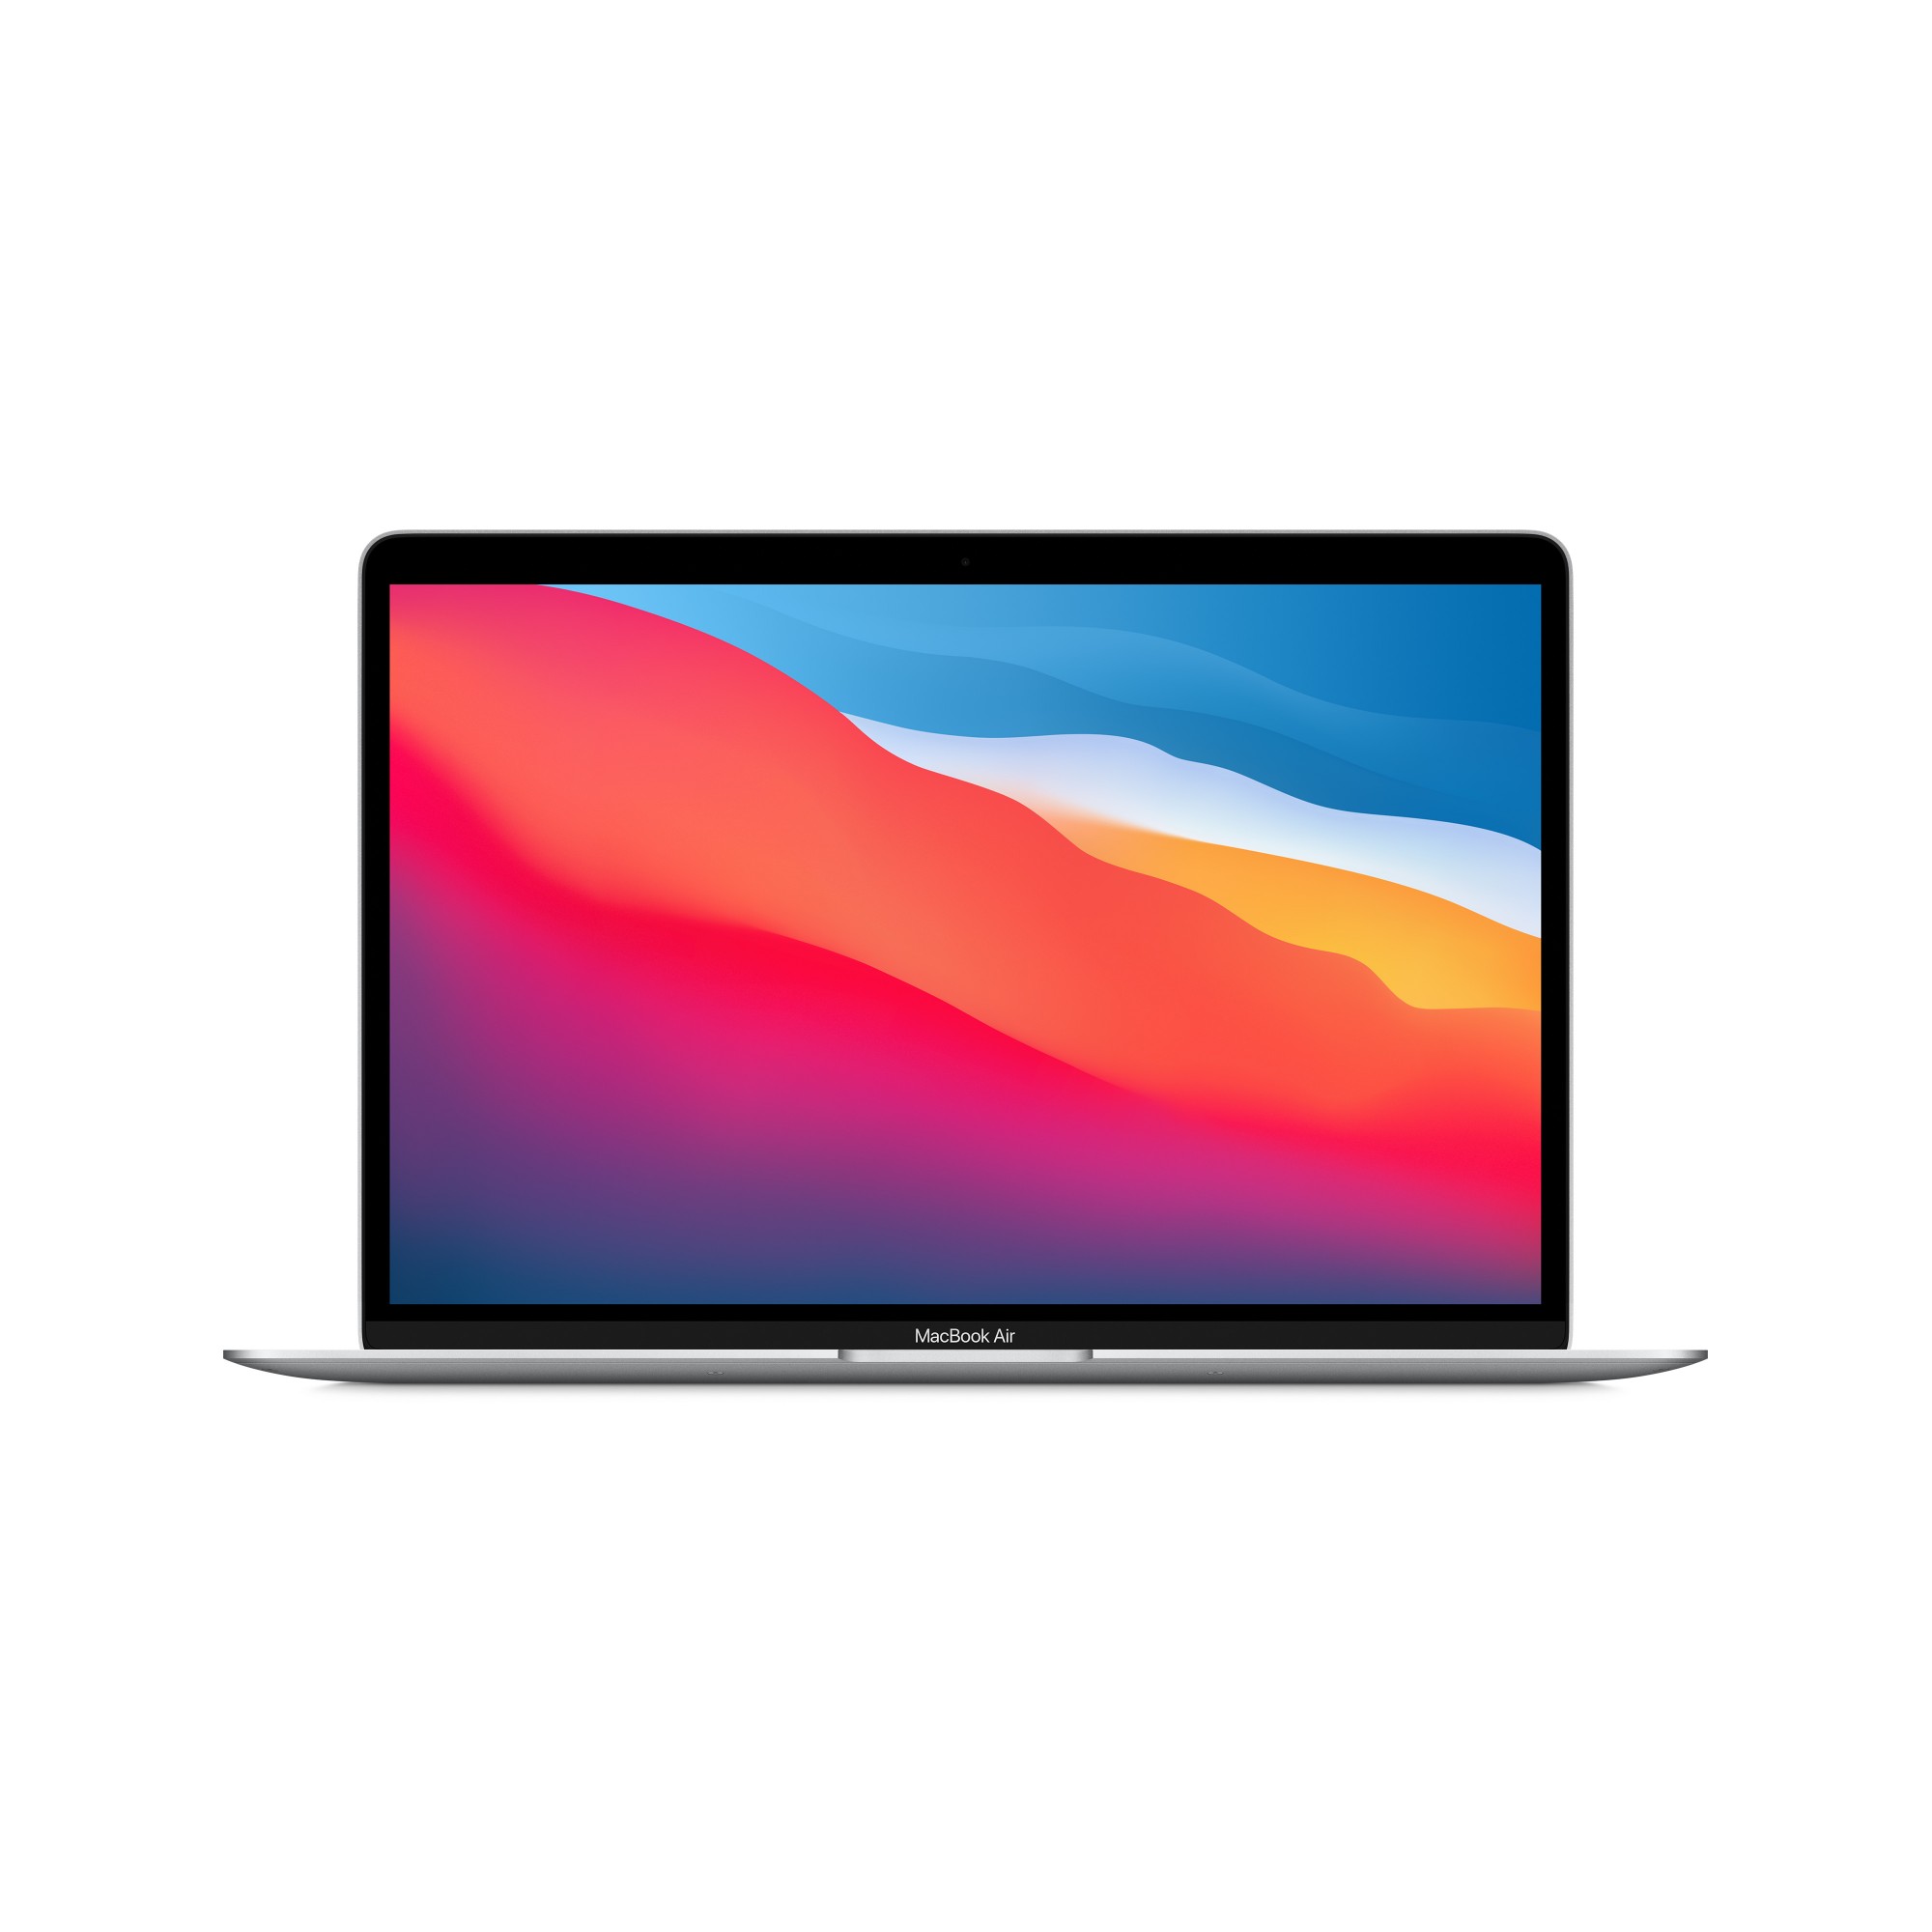 MacBook Air, 13", Silver, Apple M1 chip with 8?core CPU and 7?core GPU, 8GB unified memory, 256GB SSD storage, 16-core Neural Engine, Backlit Magic Keyboard - British UK Power Supply